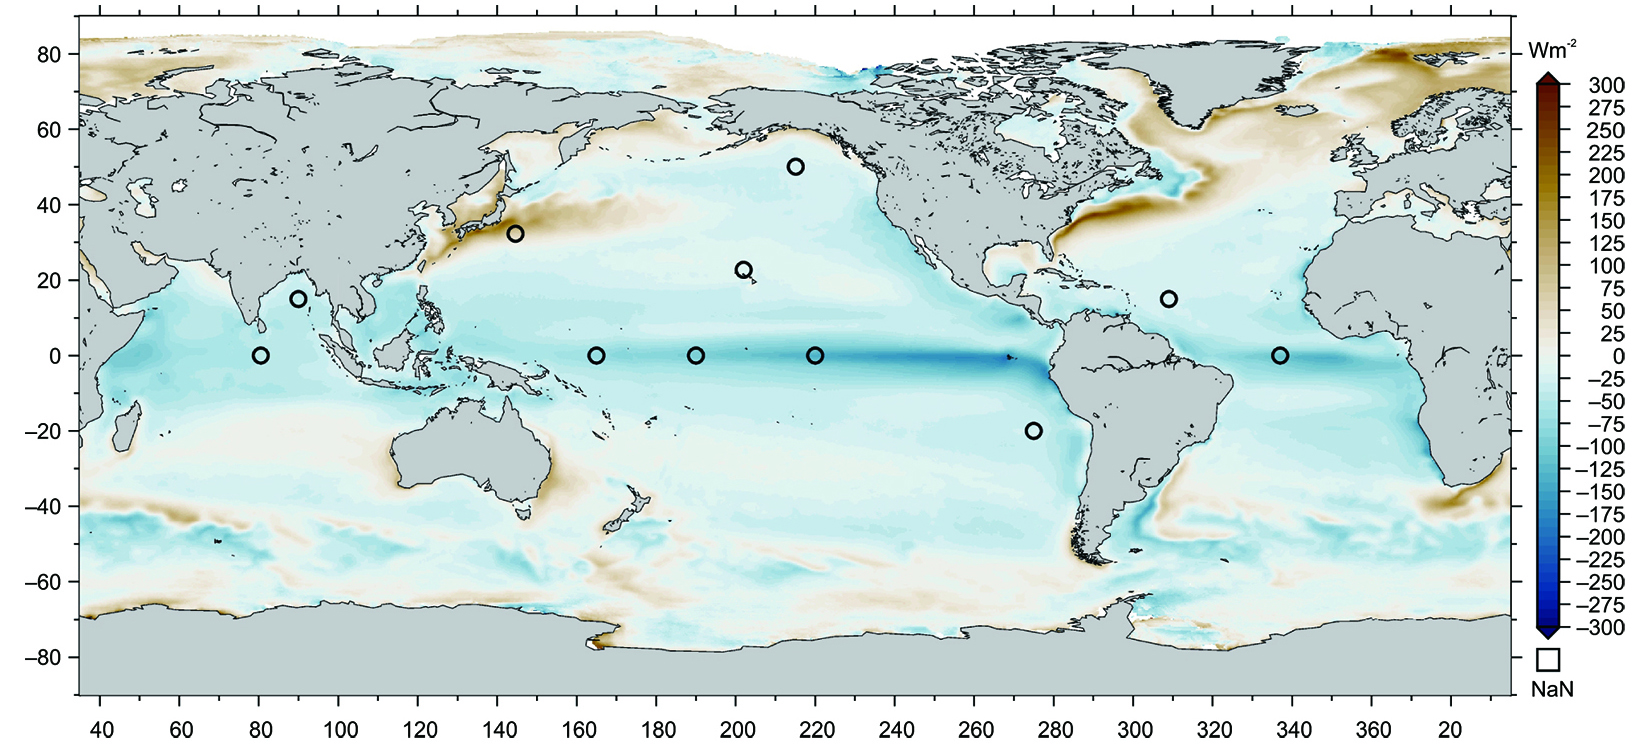 Air-sea heat flux distribution for the last three decades estimated by J-OFURO3. A positive value shows heat transfer from the ocean to the atmosphere.